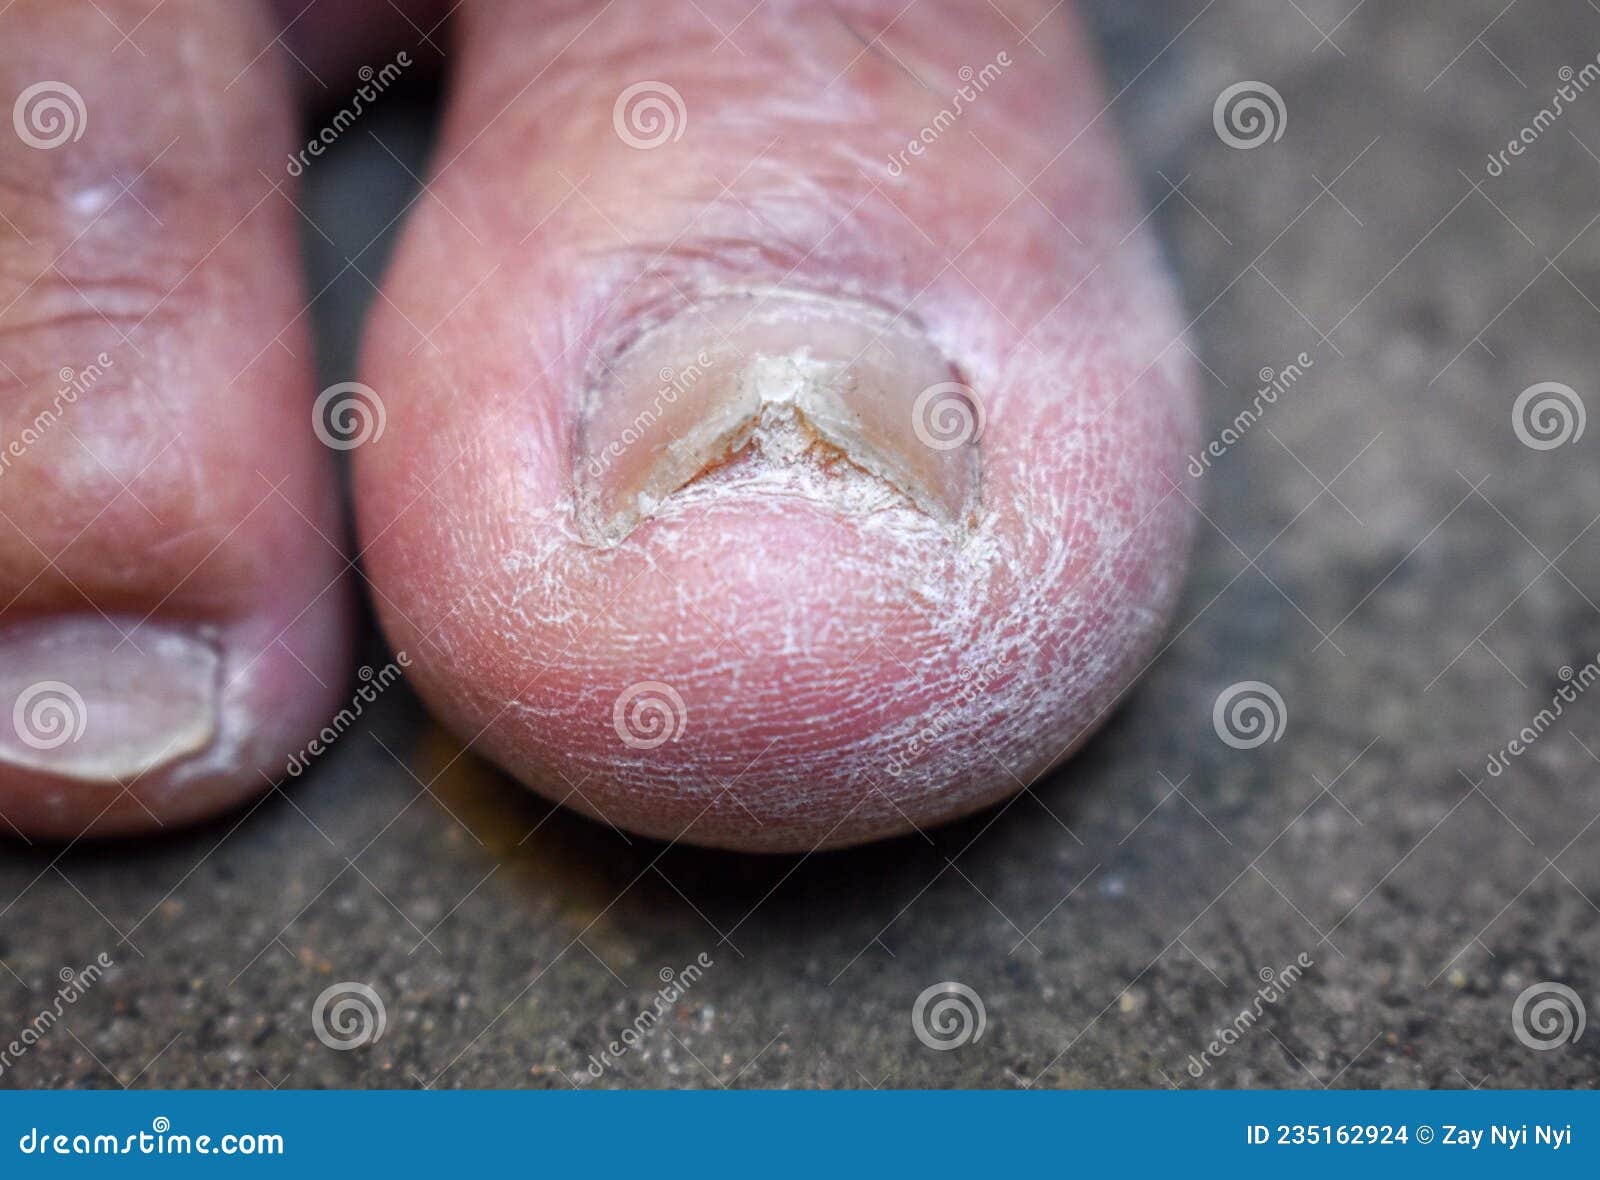 Fungal Nail Infection. Onychomycosis, Also Called Tinea Unguium